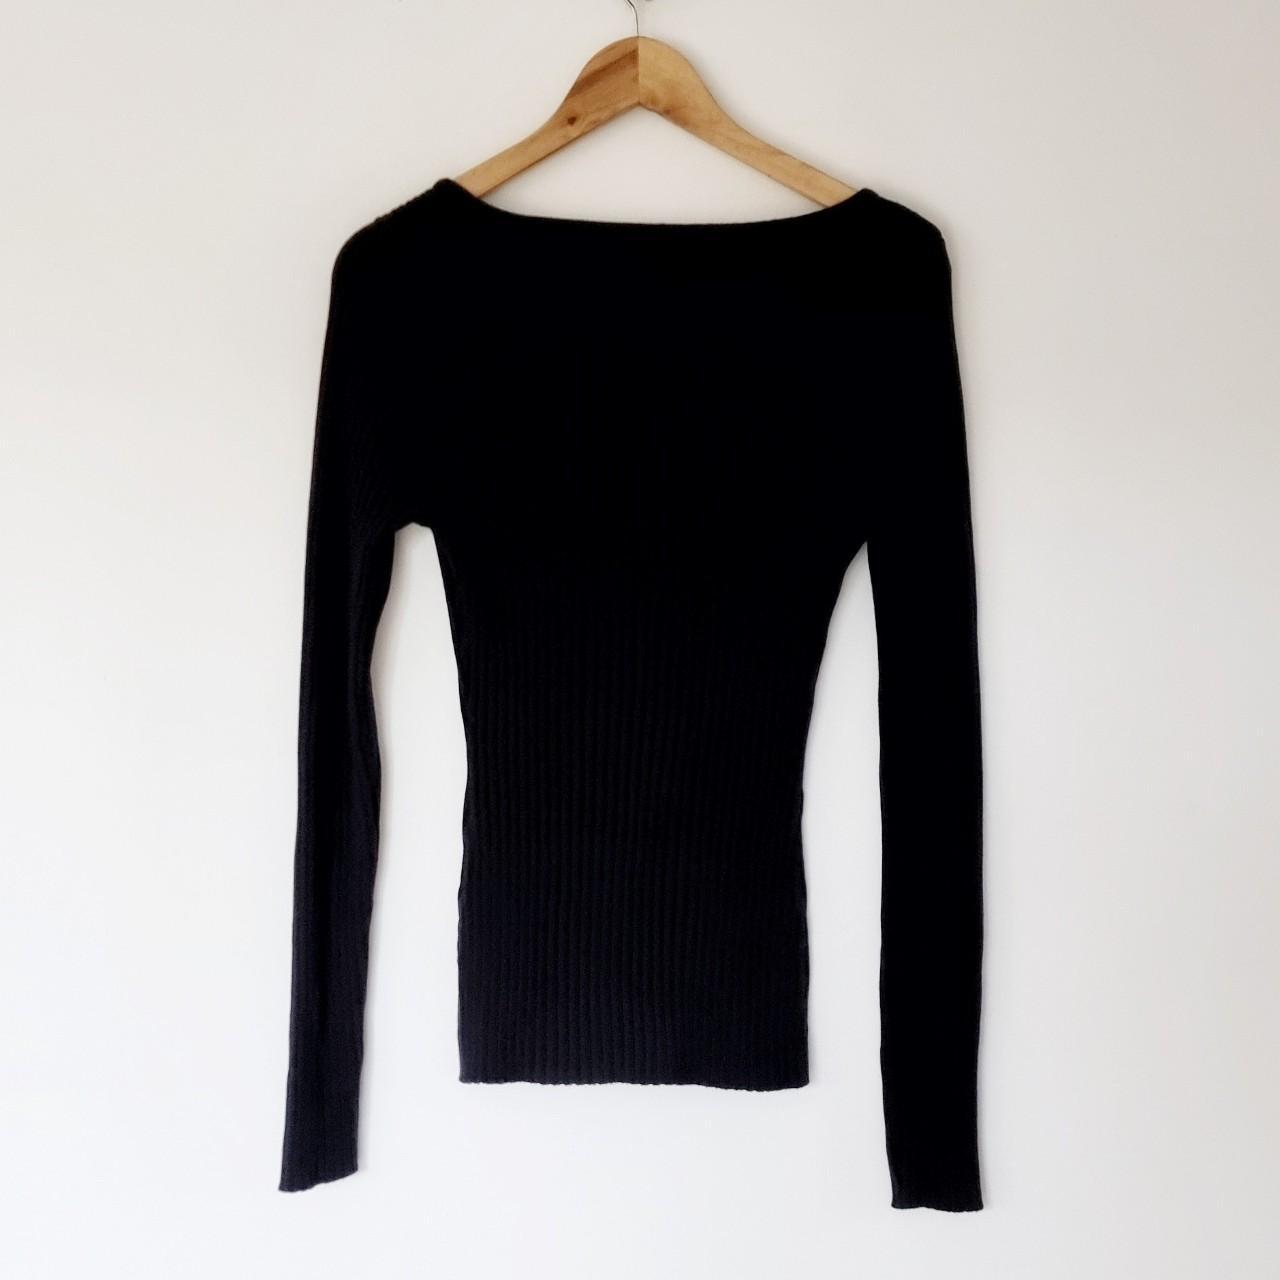 Anna Quan Mia Raven Ribbed Knit Top in Black - Size... - Depop